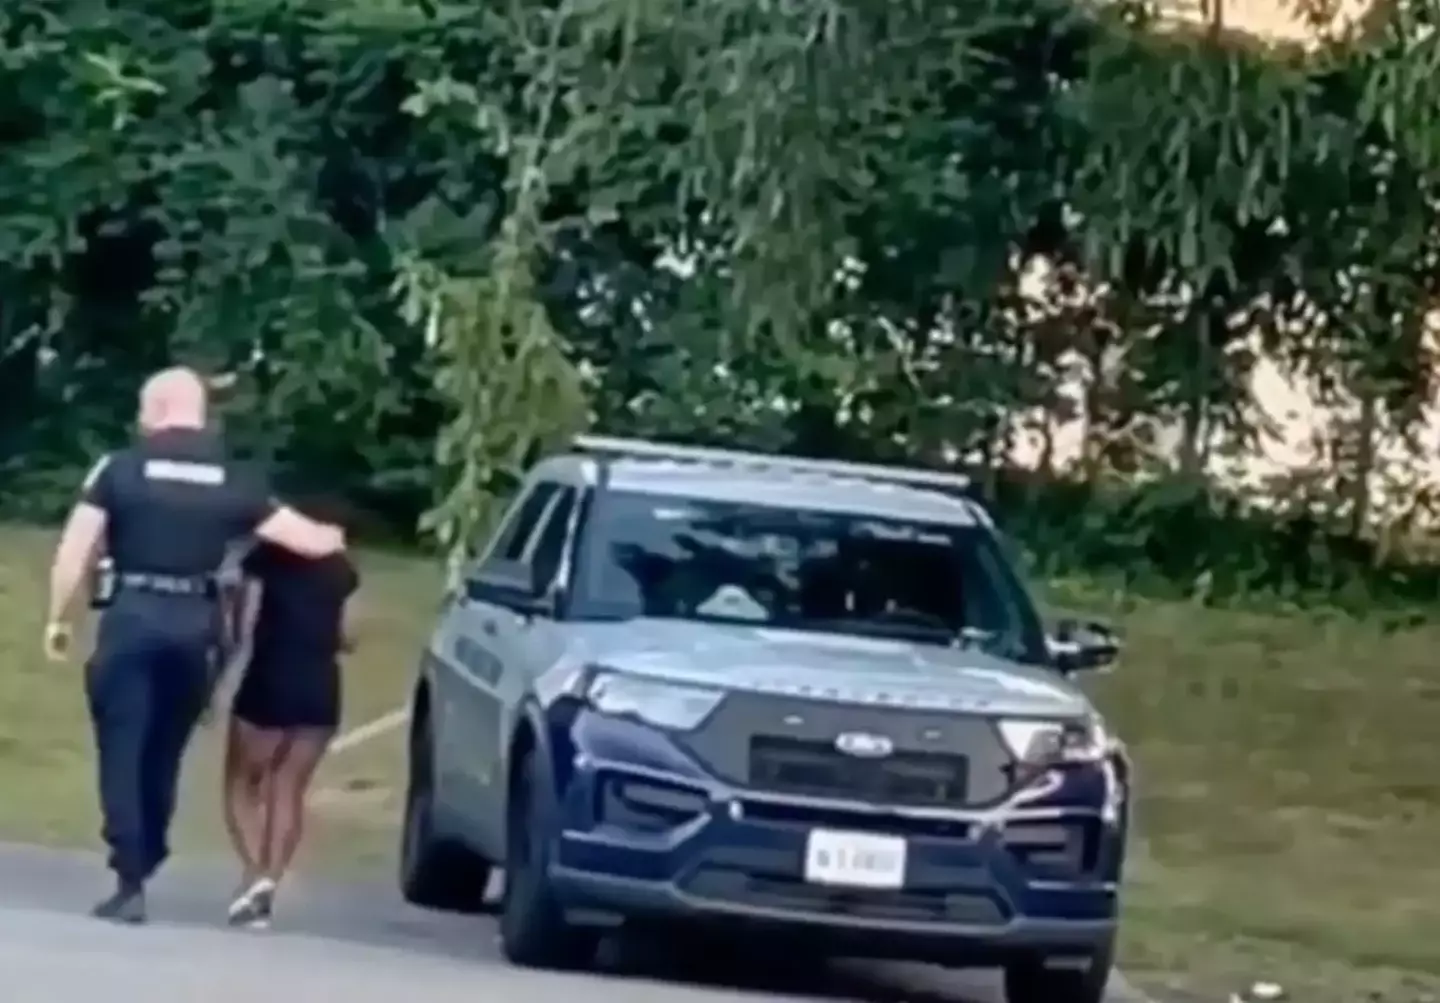 The video of the pair in a car park has gone viral.